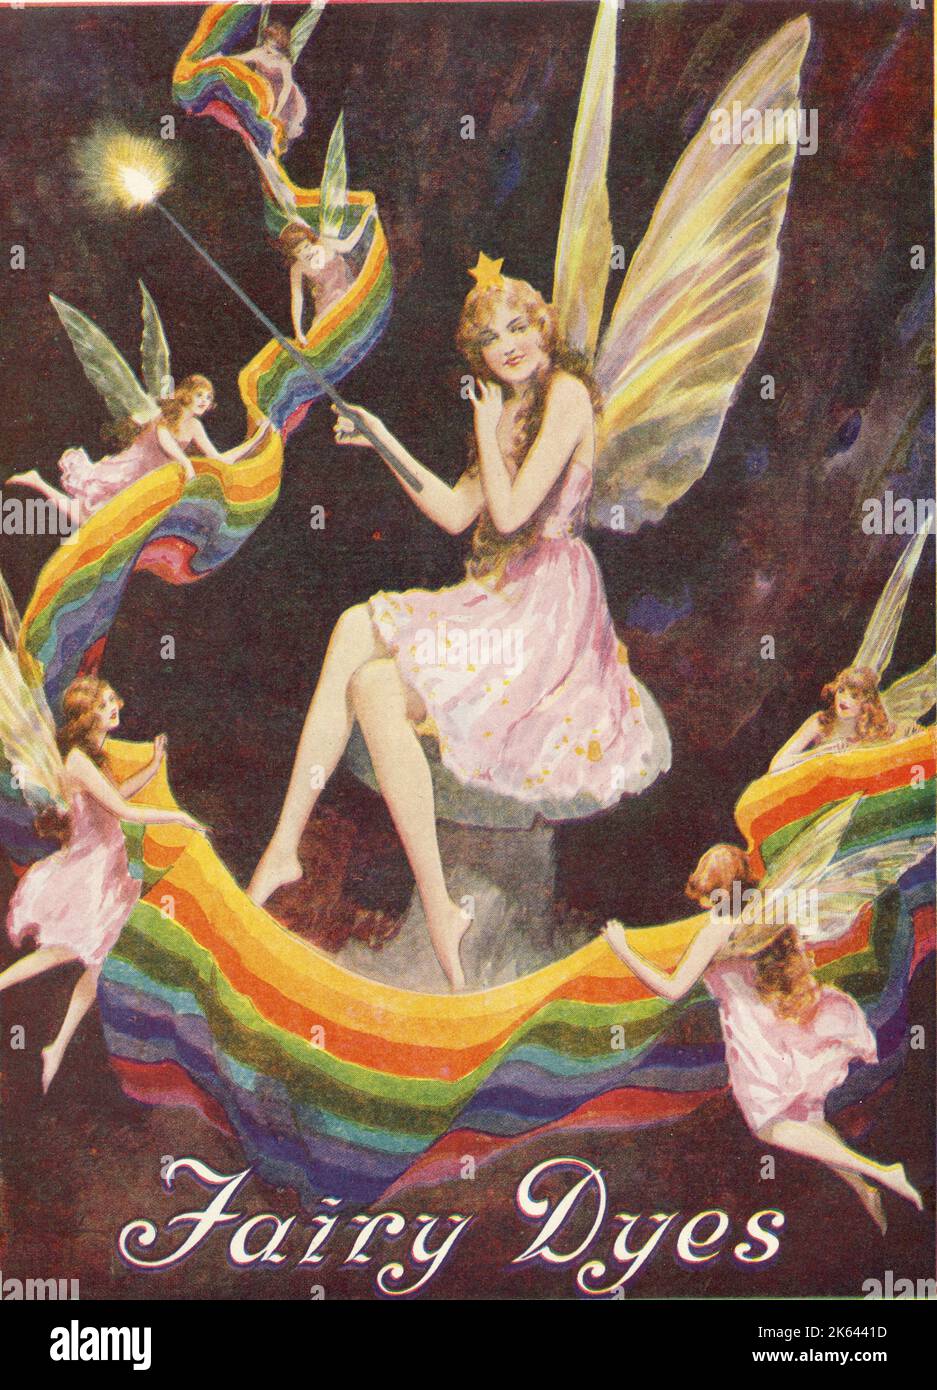 Advertisement for Fairy Dyes, promoted, appropriately, by some fairies who flutter through the night sky carrying a length of rainbow fabric. Stock Photo